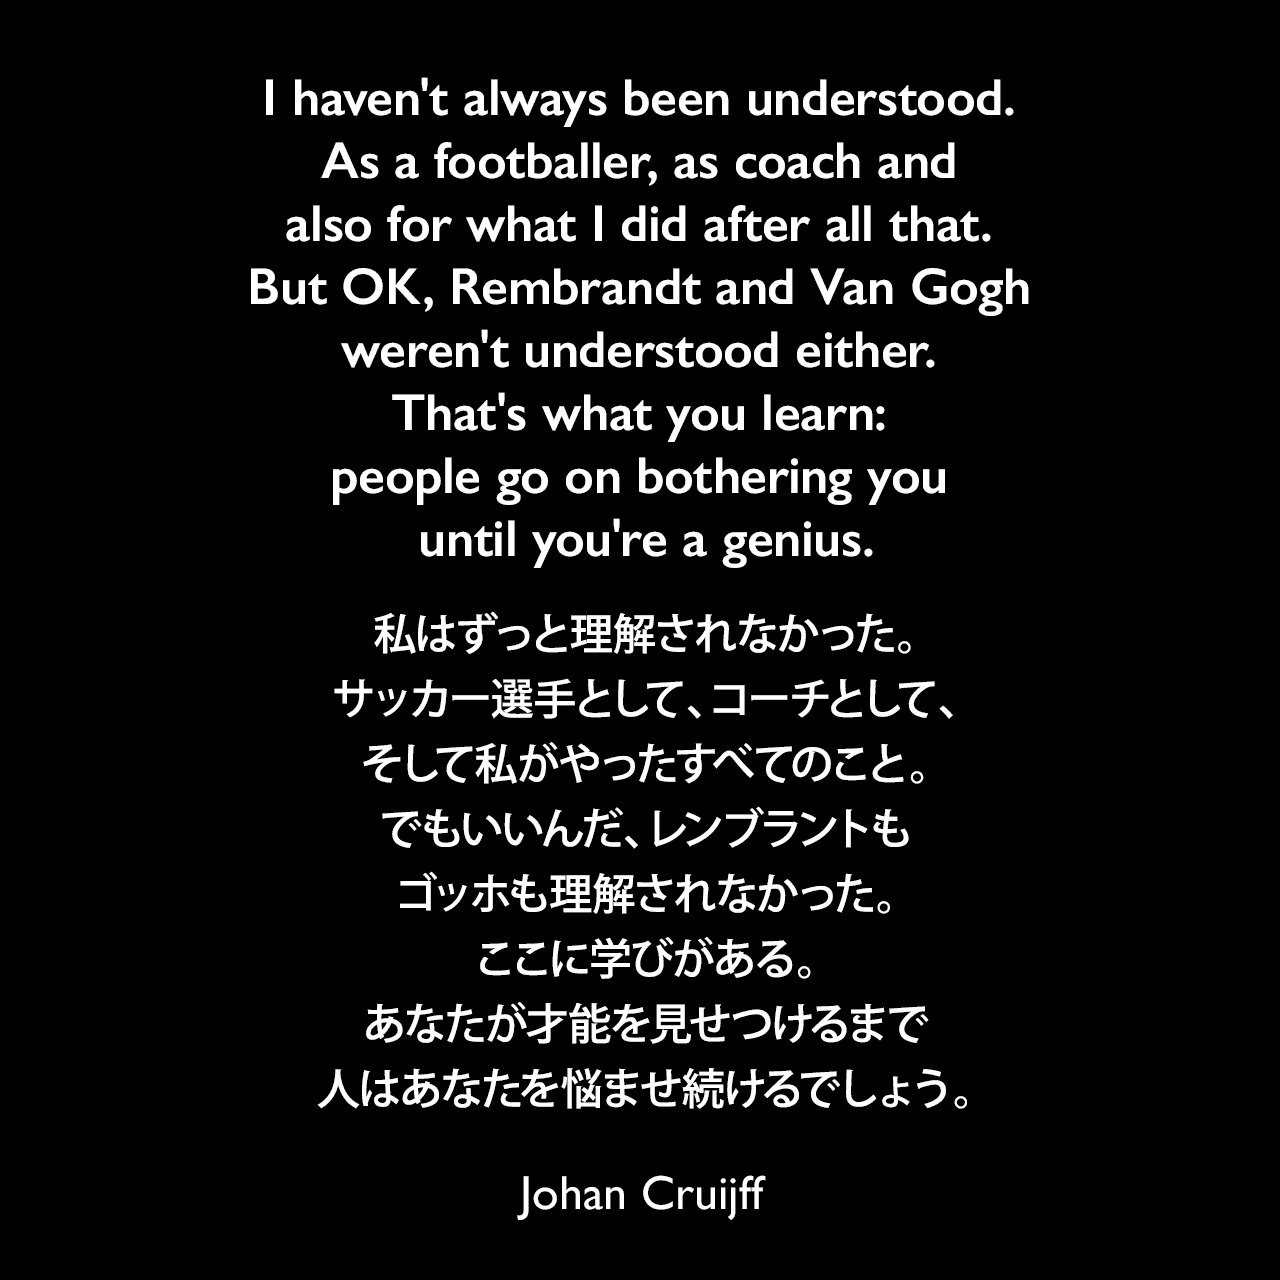 I haven't always been understood. As a footballer, as coach and also for what I did after all that. But OK, Rembrandt and Van Gogh weren't understood either. That's what you learn: people go on bothering you until you're a genius.私はずっと理解されなかった。サッカー選手として、コーチとして、そして私がやったすべてのこと。でもいいんだ、レンブラントもゴッホも理解されなかった。ここに学びがある。あなたが才能を見せつけるまで人はあなたを悩ませ続けるでしょう。- ヨハン・クライフによる自伝「My Turn: The Autobiography」よりJohan Cruijff